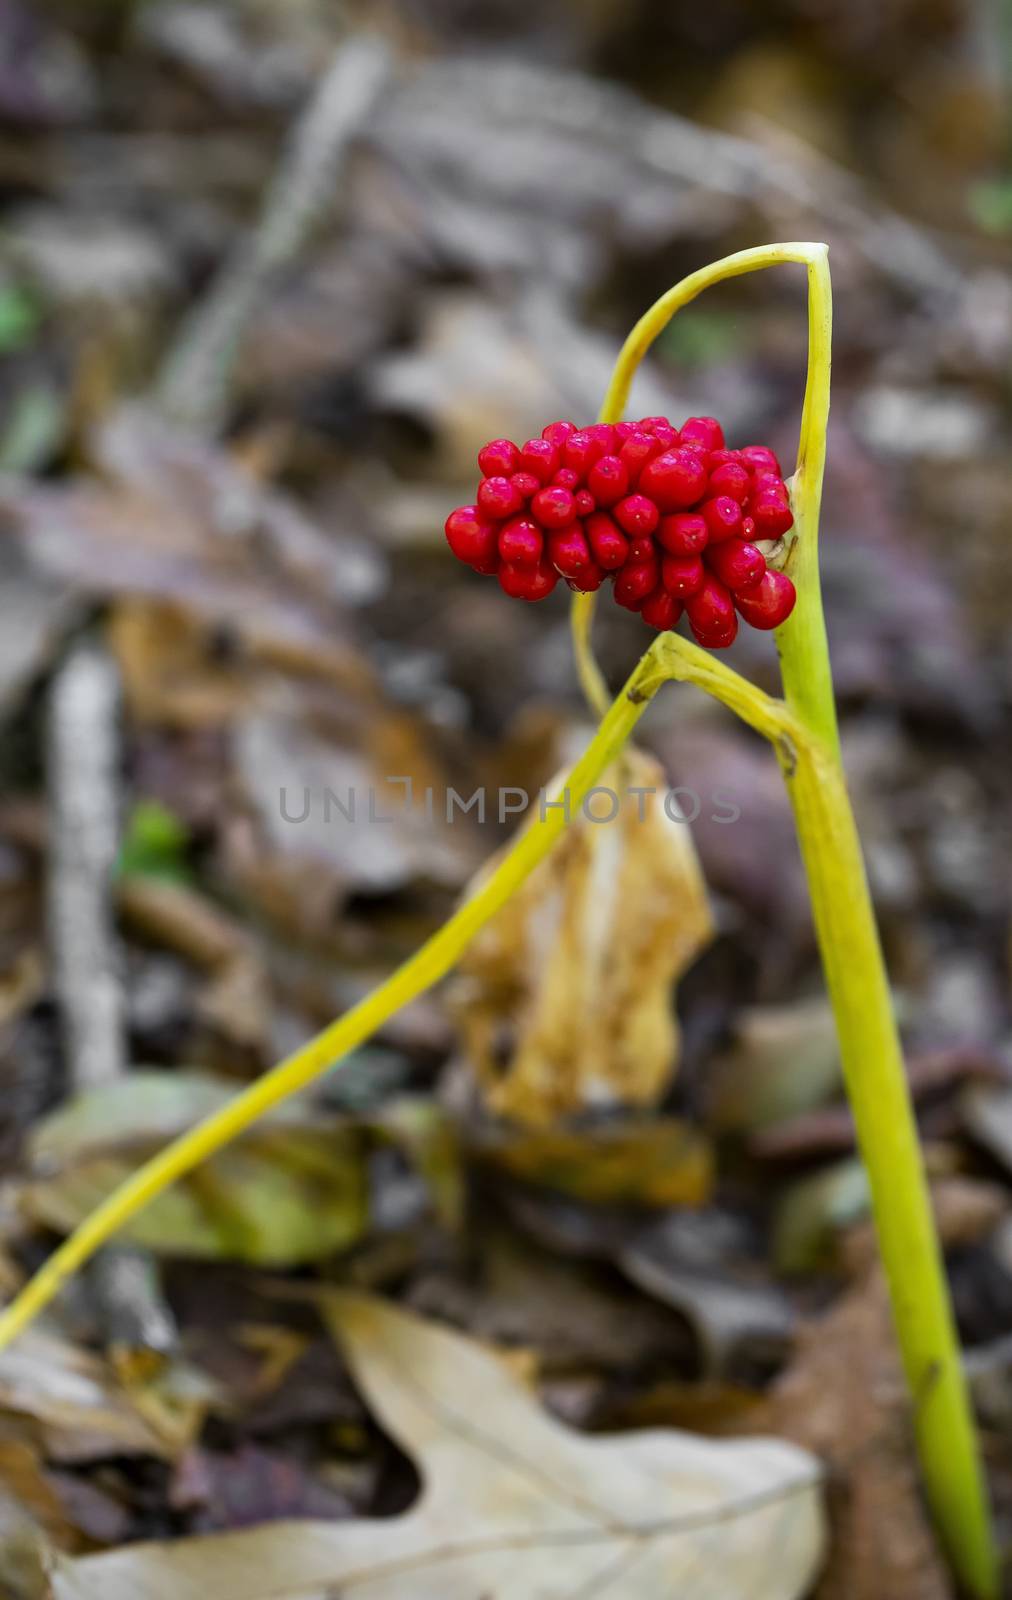 A ripe, red, seed pod is seen on a green dragon wildflower (Arisaema dracontium). The main plant is wilting in the autumn weather.